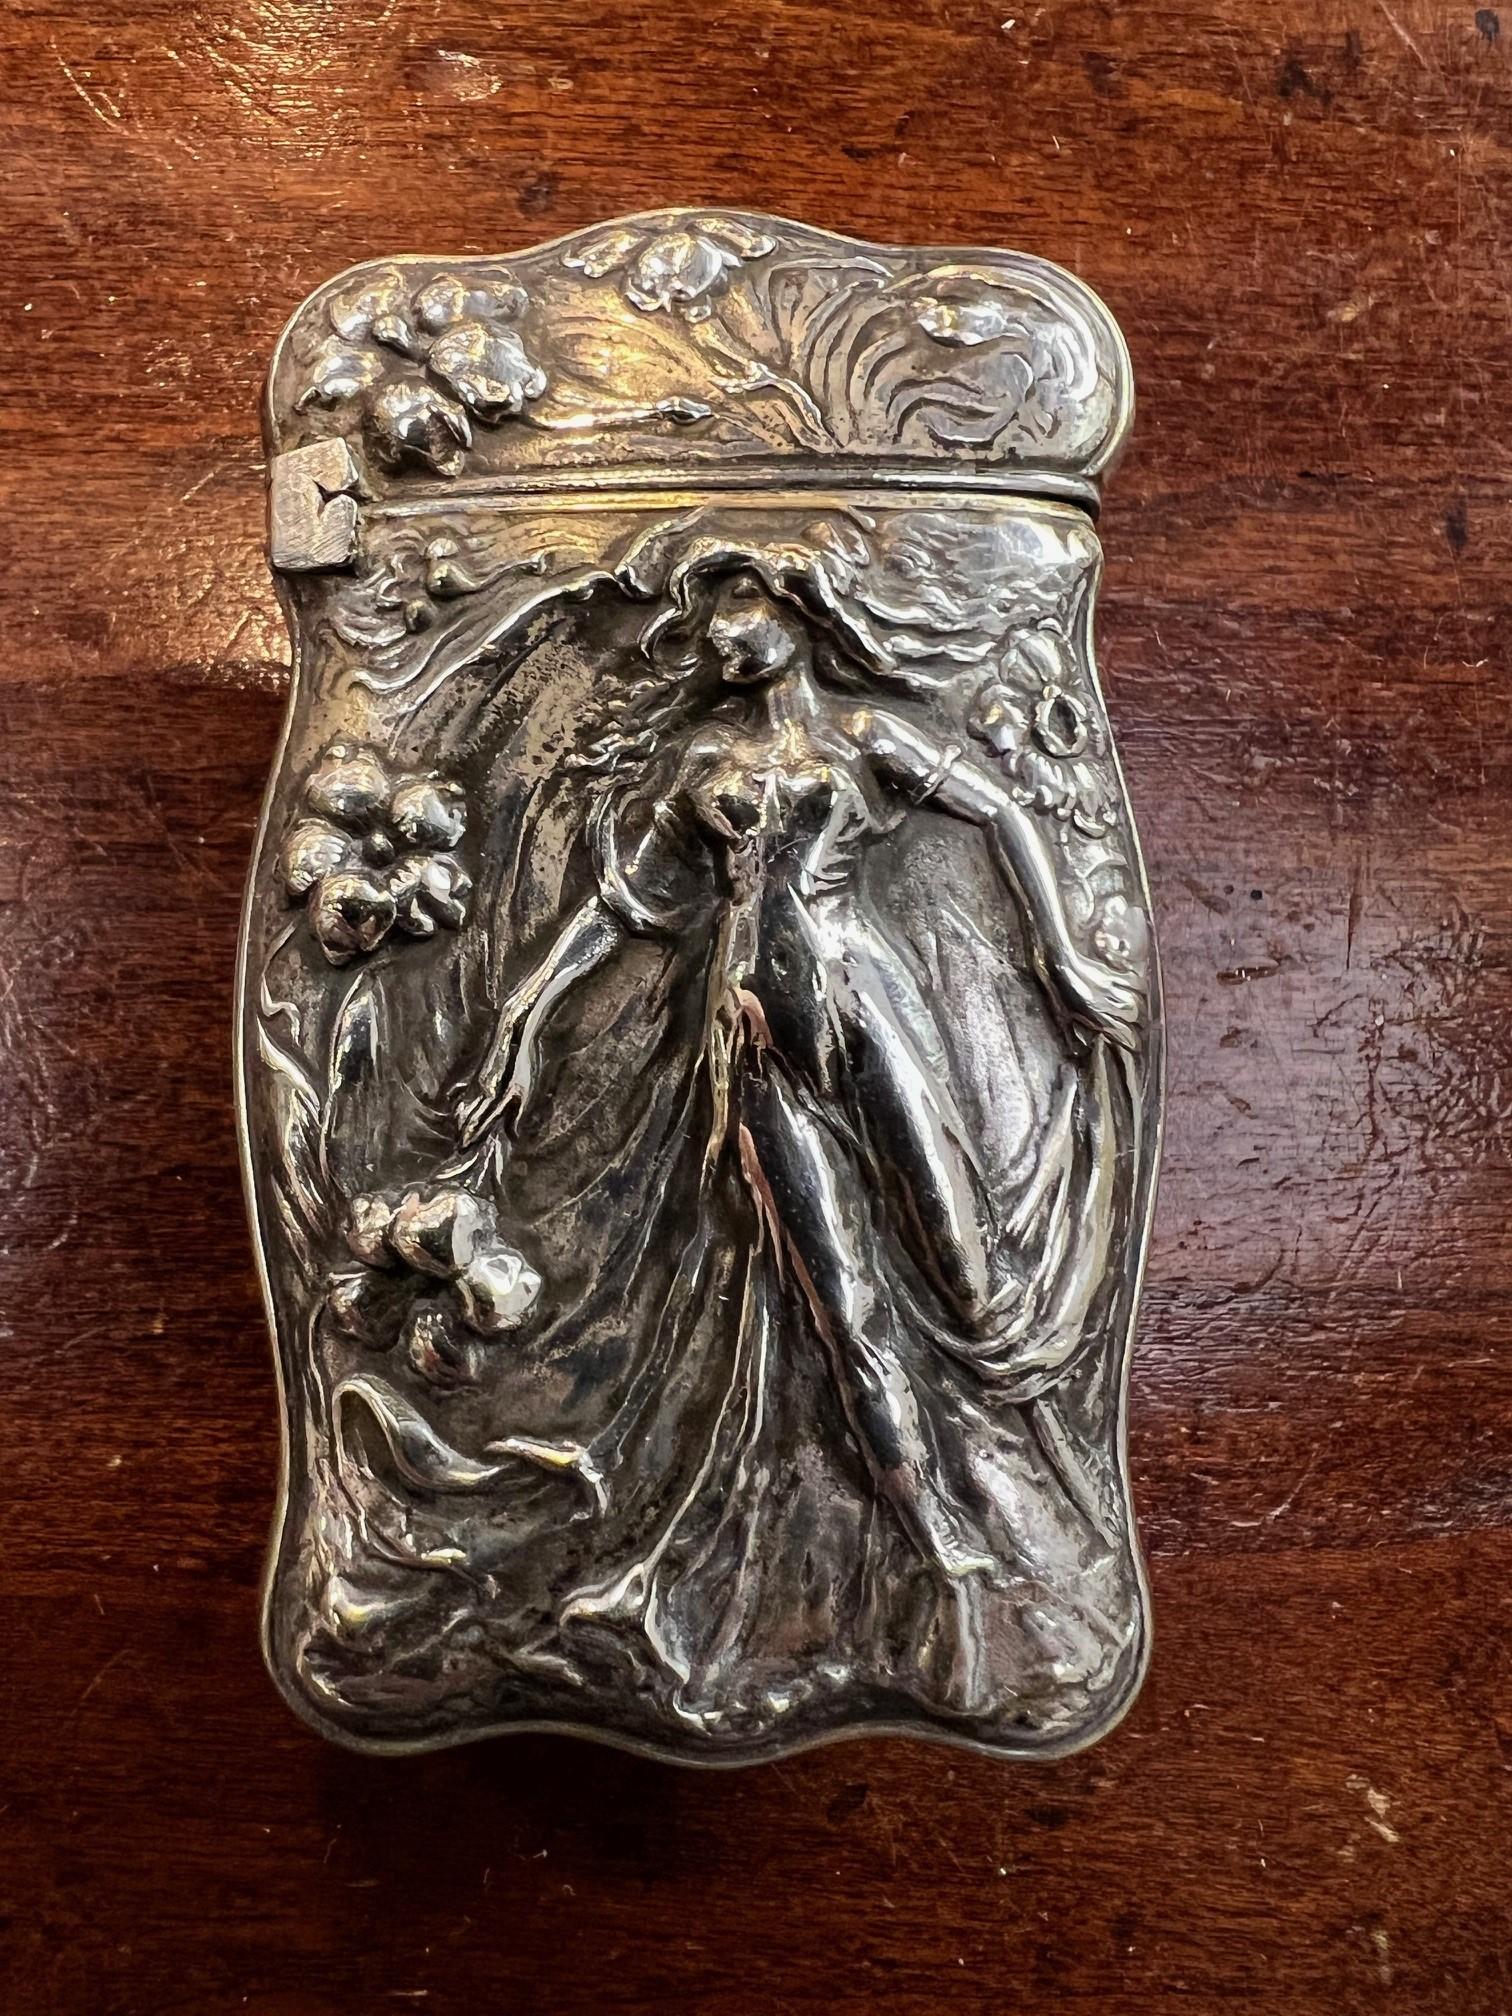 Antique 1890s Silver Art Nouveau Lady with flowing hair repousse match safe. The other side has beautiful, art nouveau style flowers. Shown in the photos its marked C SILVER which I believe is Coin Silver. This is a very nice piece in very good